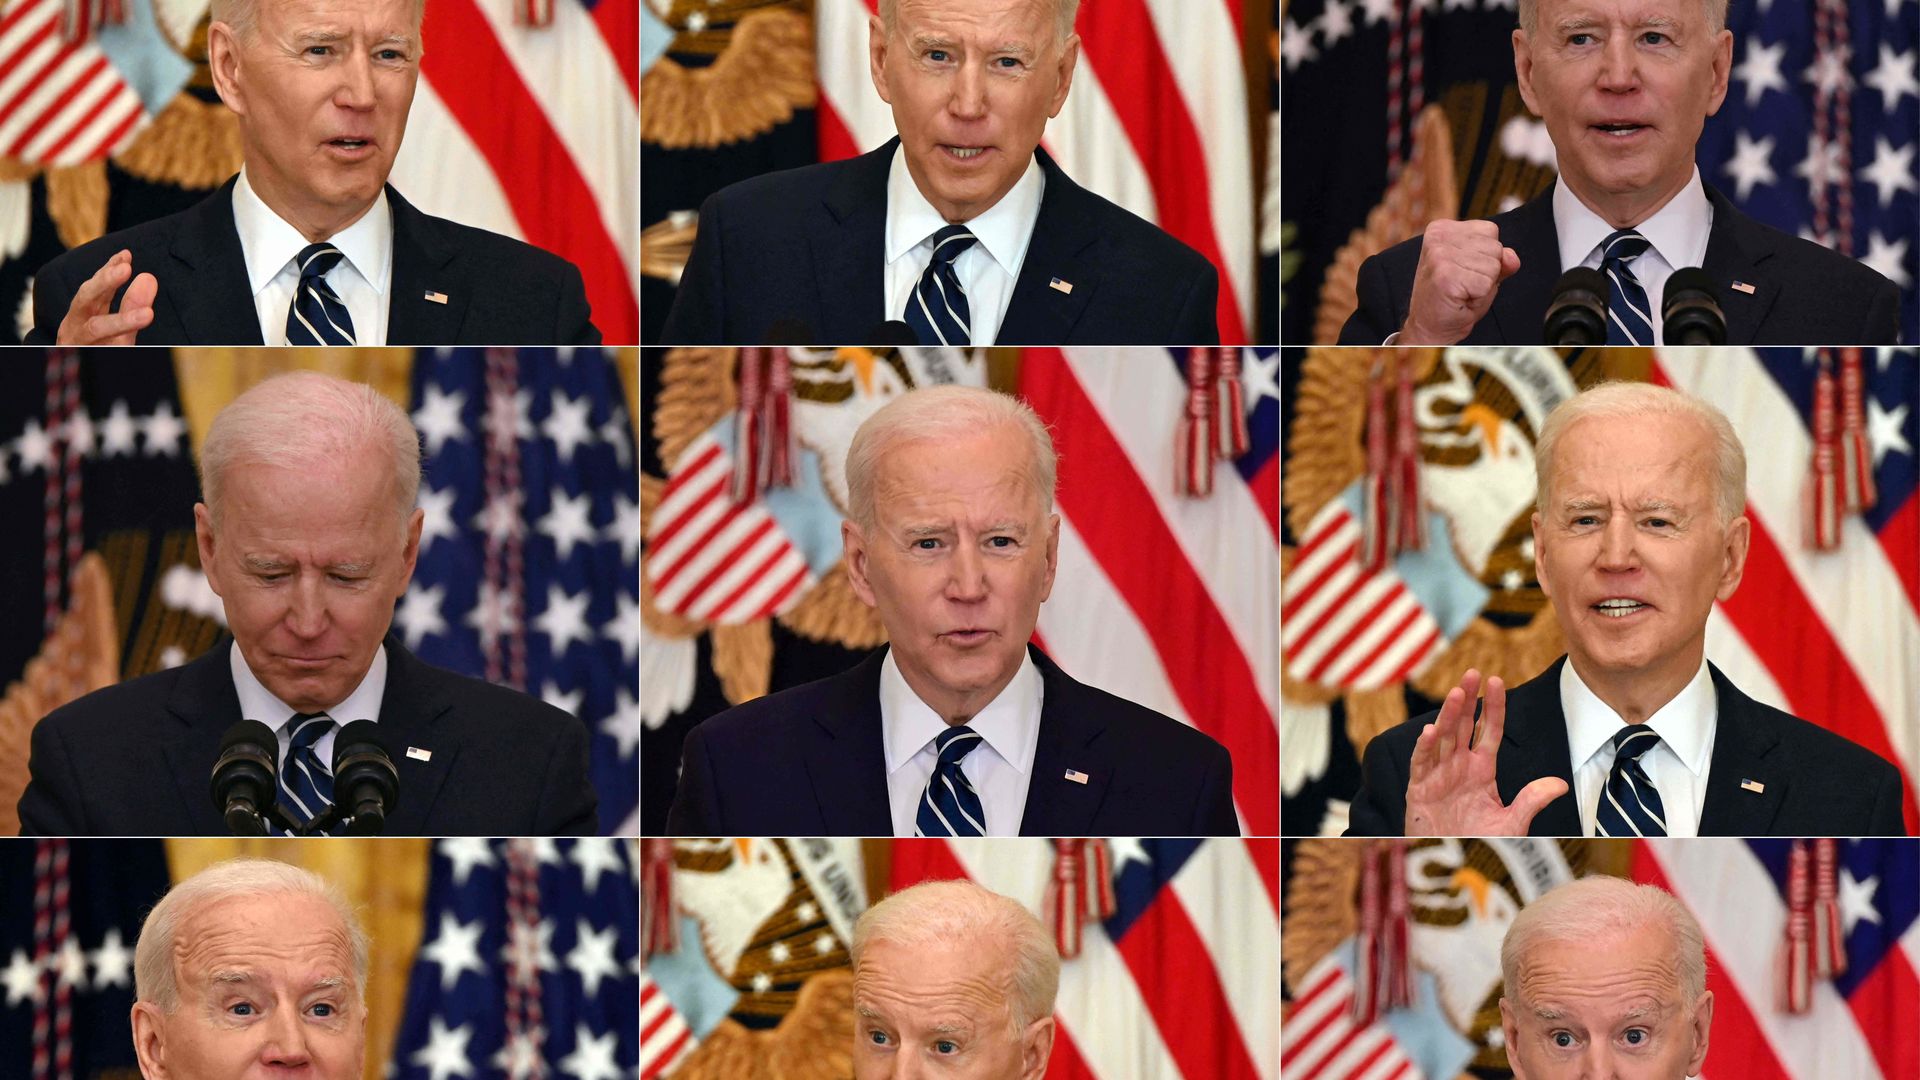 Photo montage of nine images of President Biden's facial expressions during his first presidential news conference